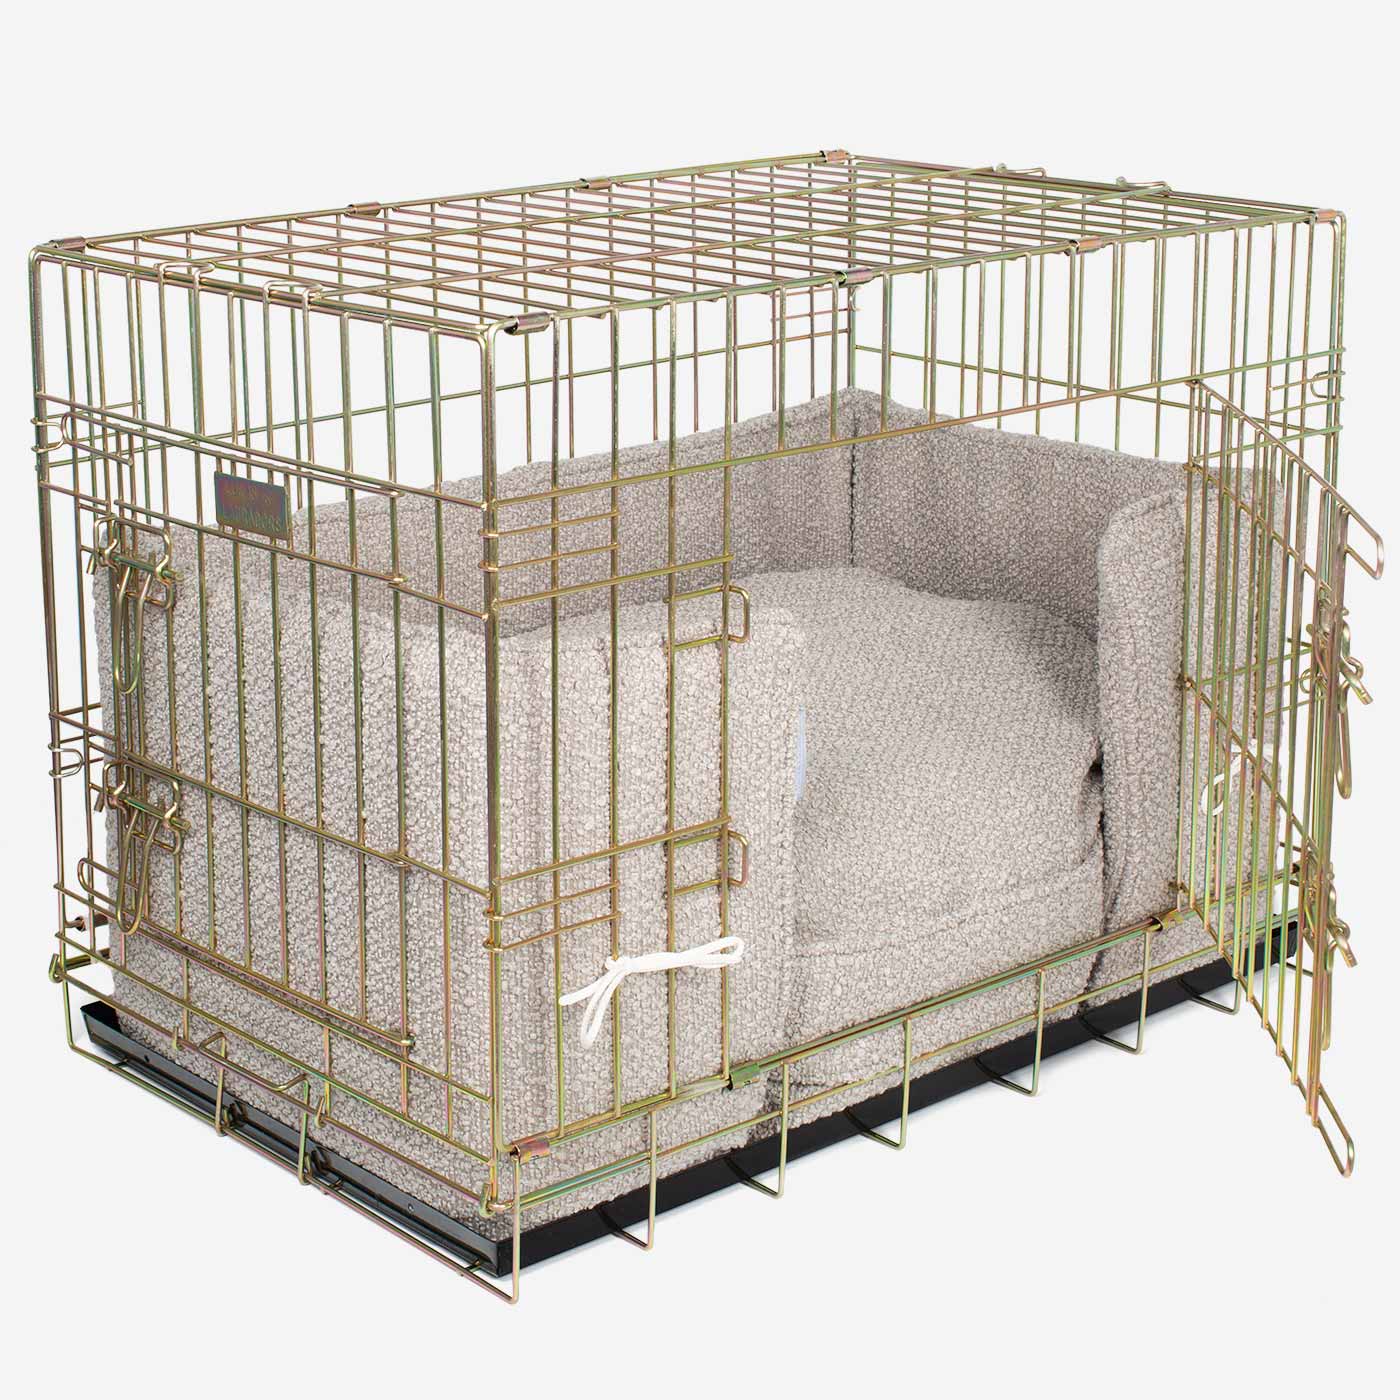 Discover Our Heavy-Duty Gold Dog Cage With Mink Bouclé Cushion & Bumper! The Perfect Cage Accessories. Available To Personalize Here at Lords & Labradors US